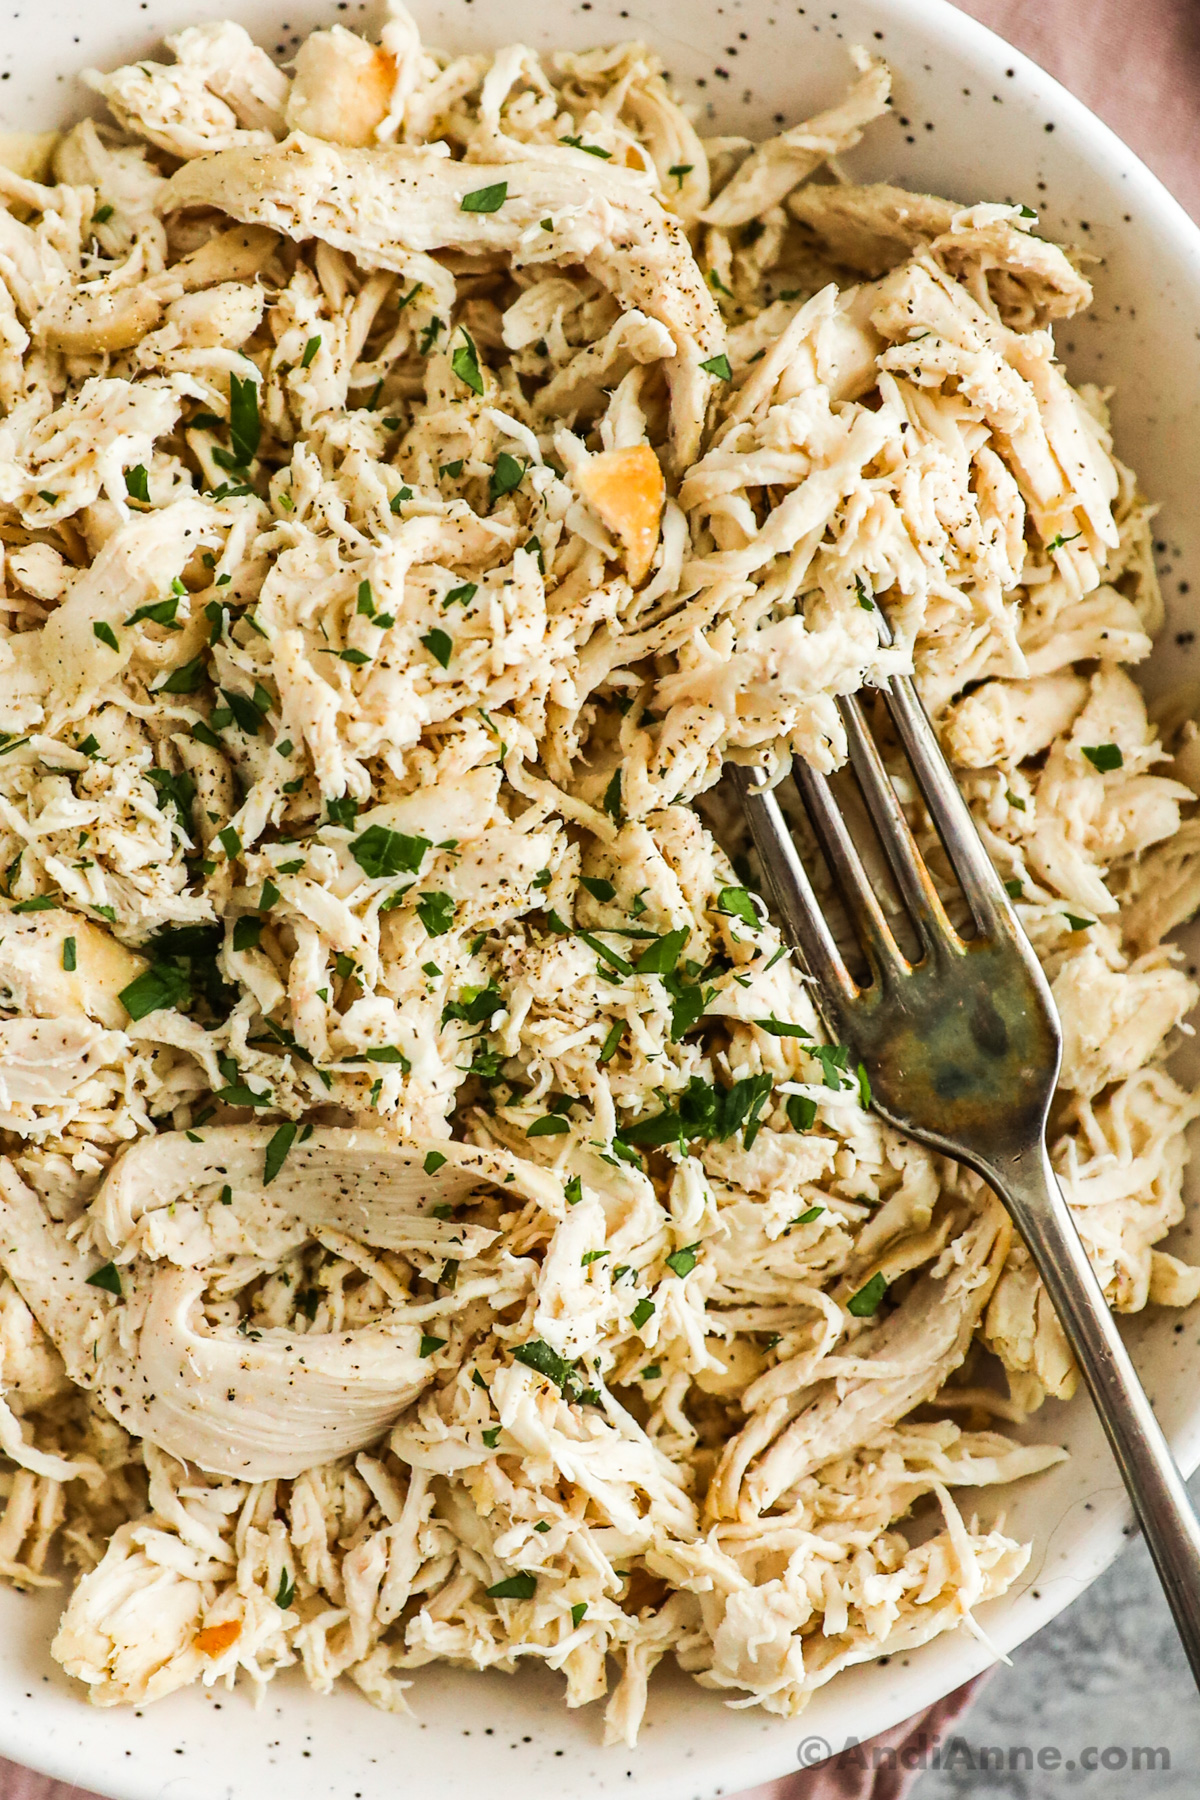 Close up of shredded chicken and a fork.